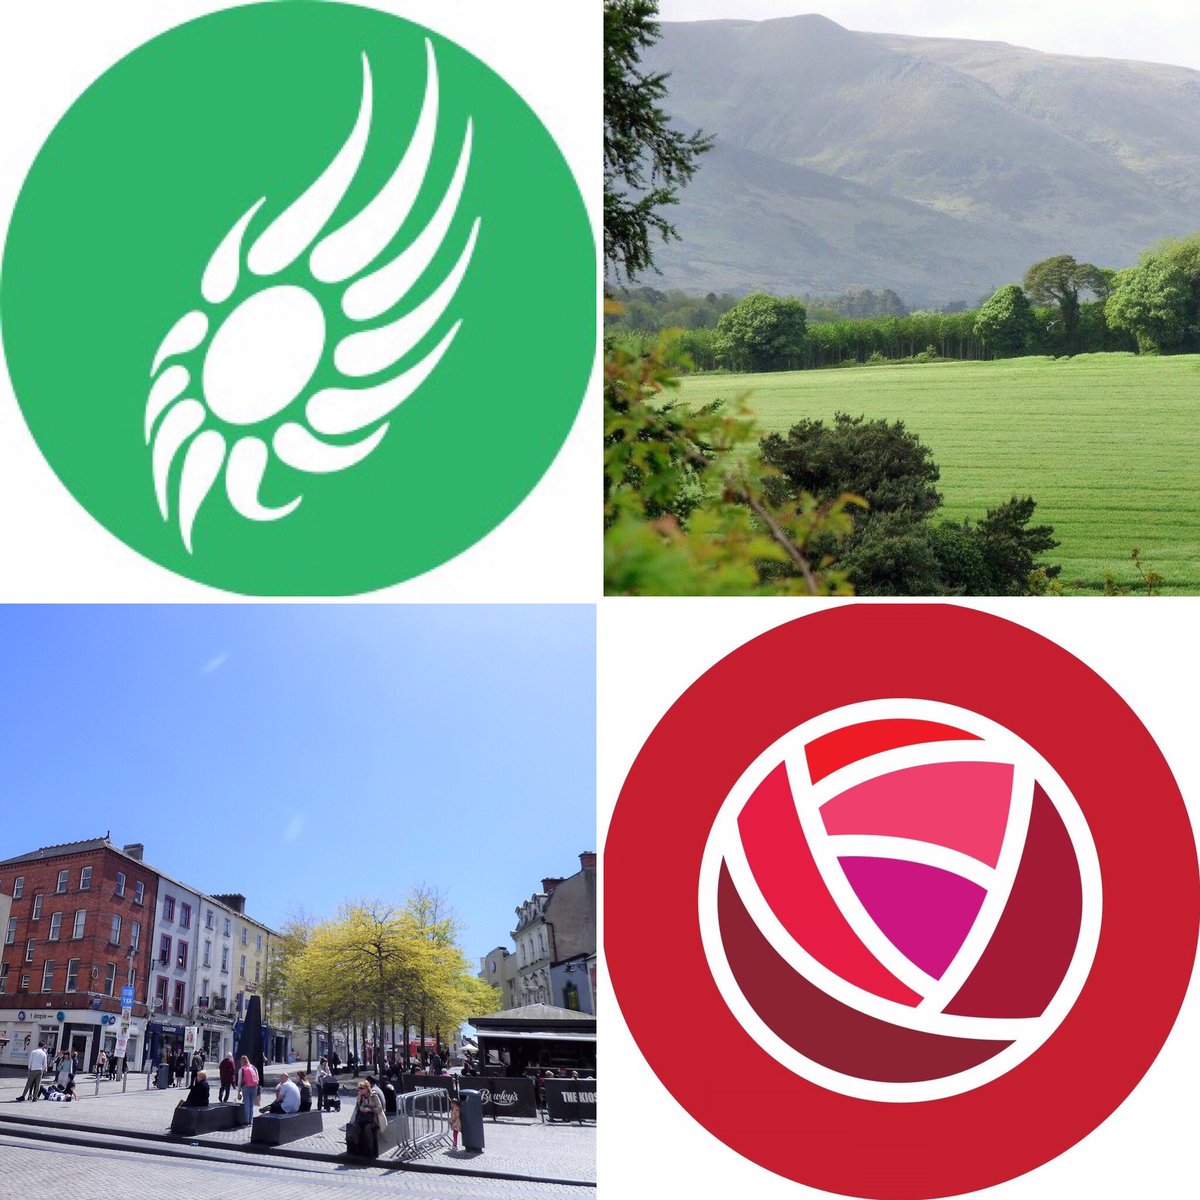 Its 4 @labour & 2 @greenparty_ie reps on newly elected @WaterfordCounci, have agreed to form a technical group. For the joint statement by Cllrs Ger Barron, @MarcKC_Green, @thomasphelan, @jodypower, @prattj00 & @seamusryan1, see facebook.com/63746639305494…